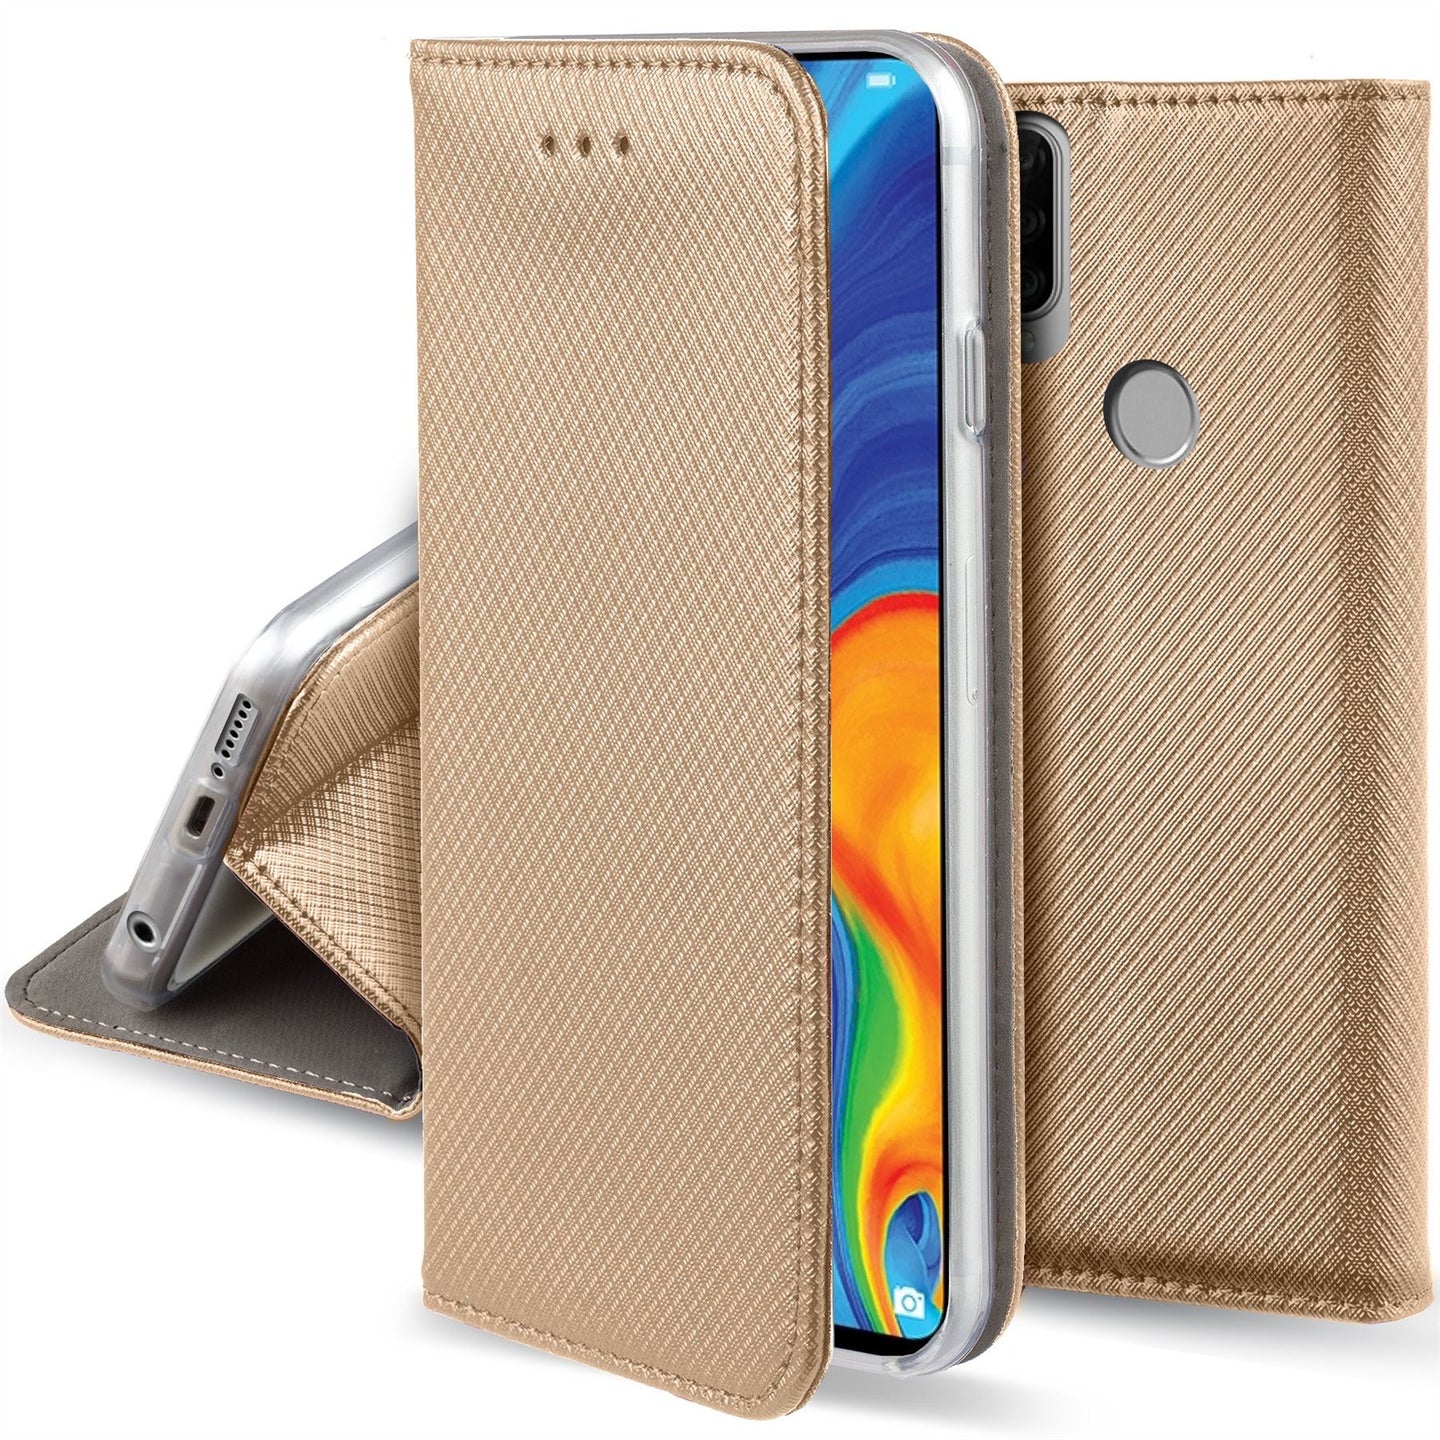 Moozy Case Flip Cover for Huawei P30 Lite, Gold - Smart Magnetic Flip Case with Card Holder and Stand